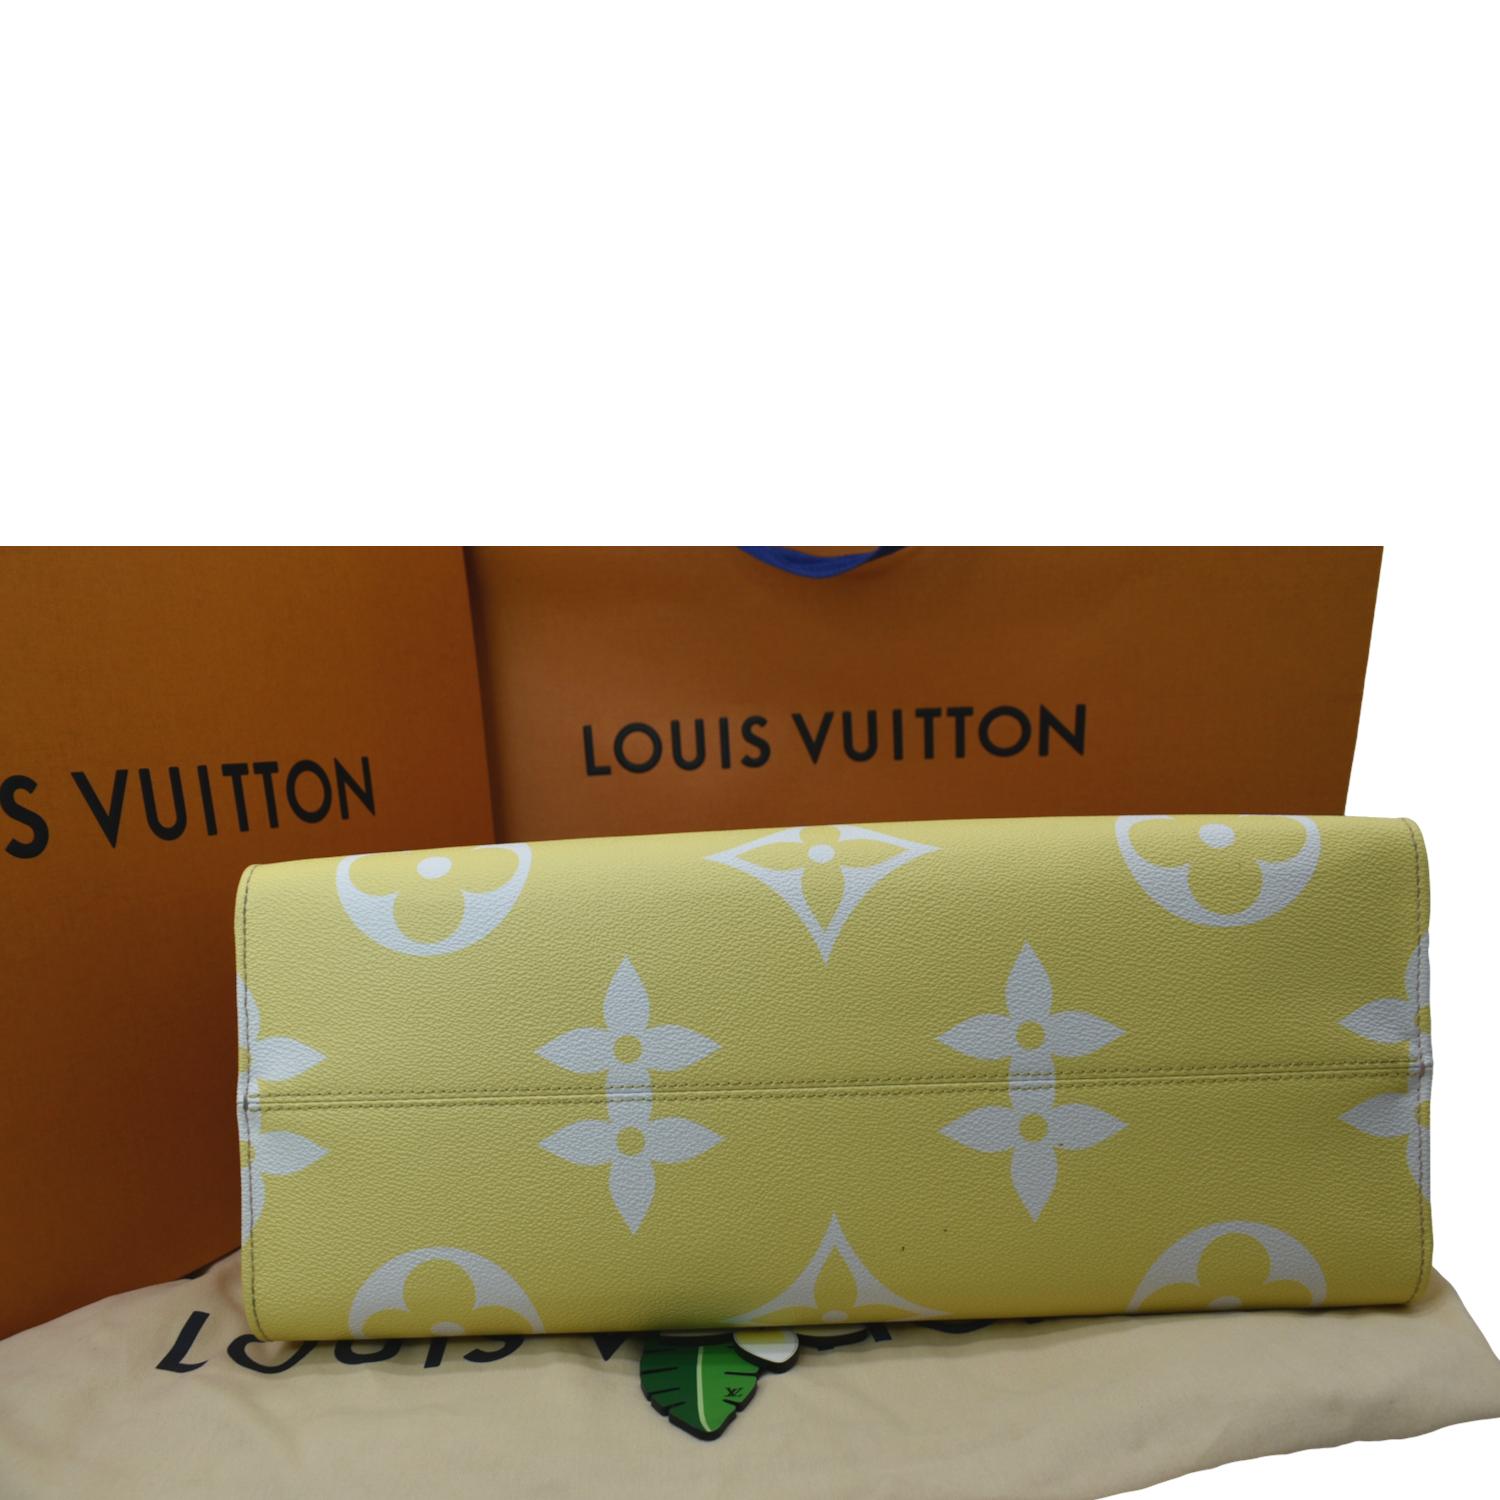 LOUIS VUITTON Monogram Giant By The Pool OnTheGo GM Light Pink